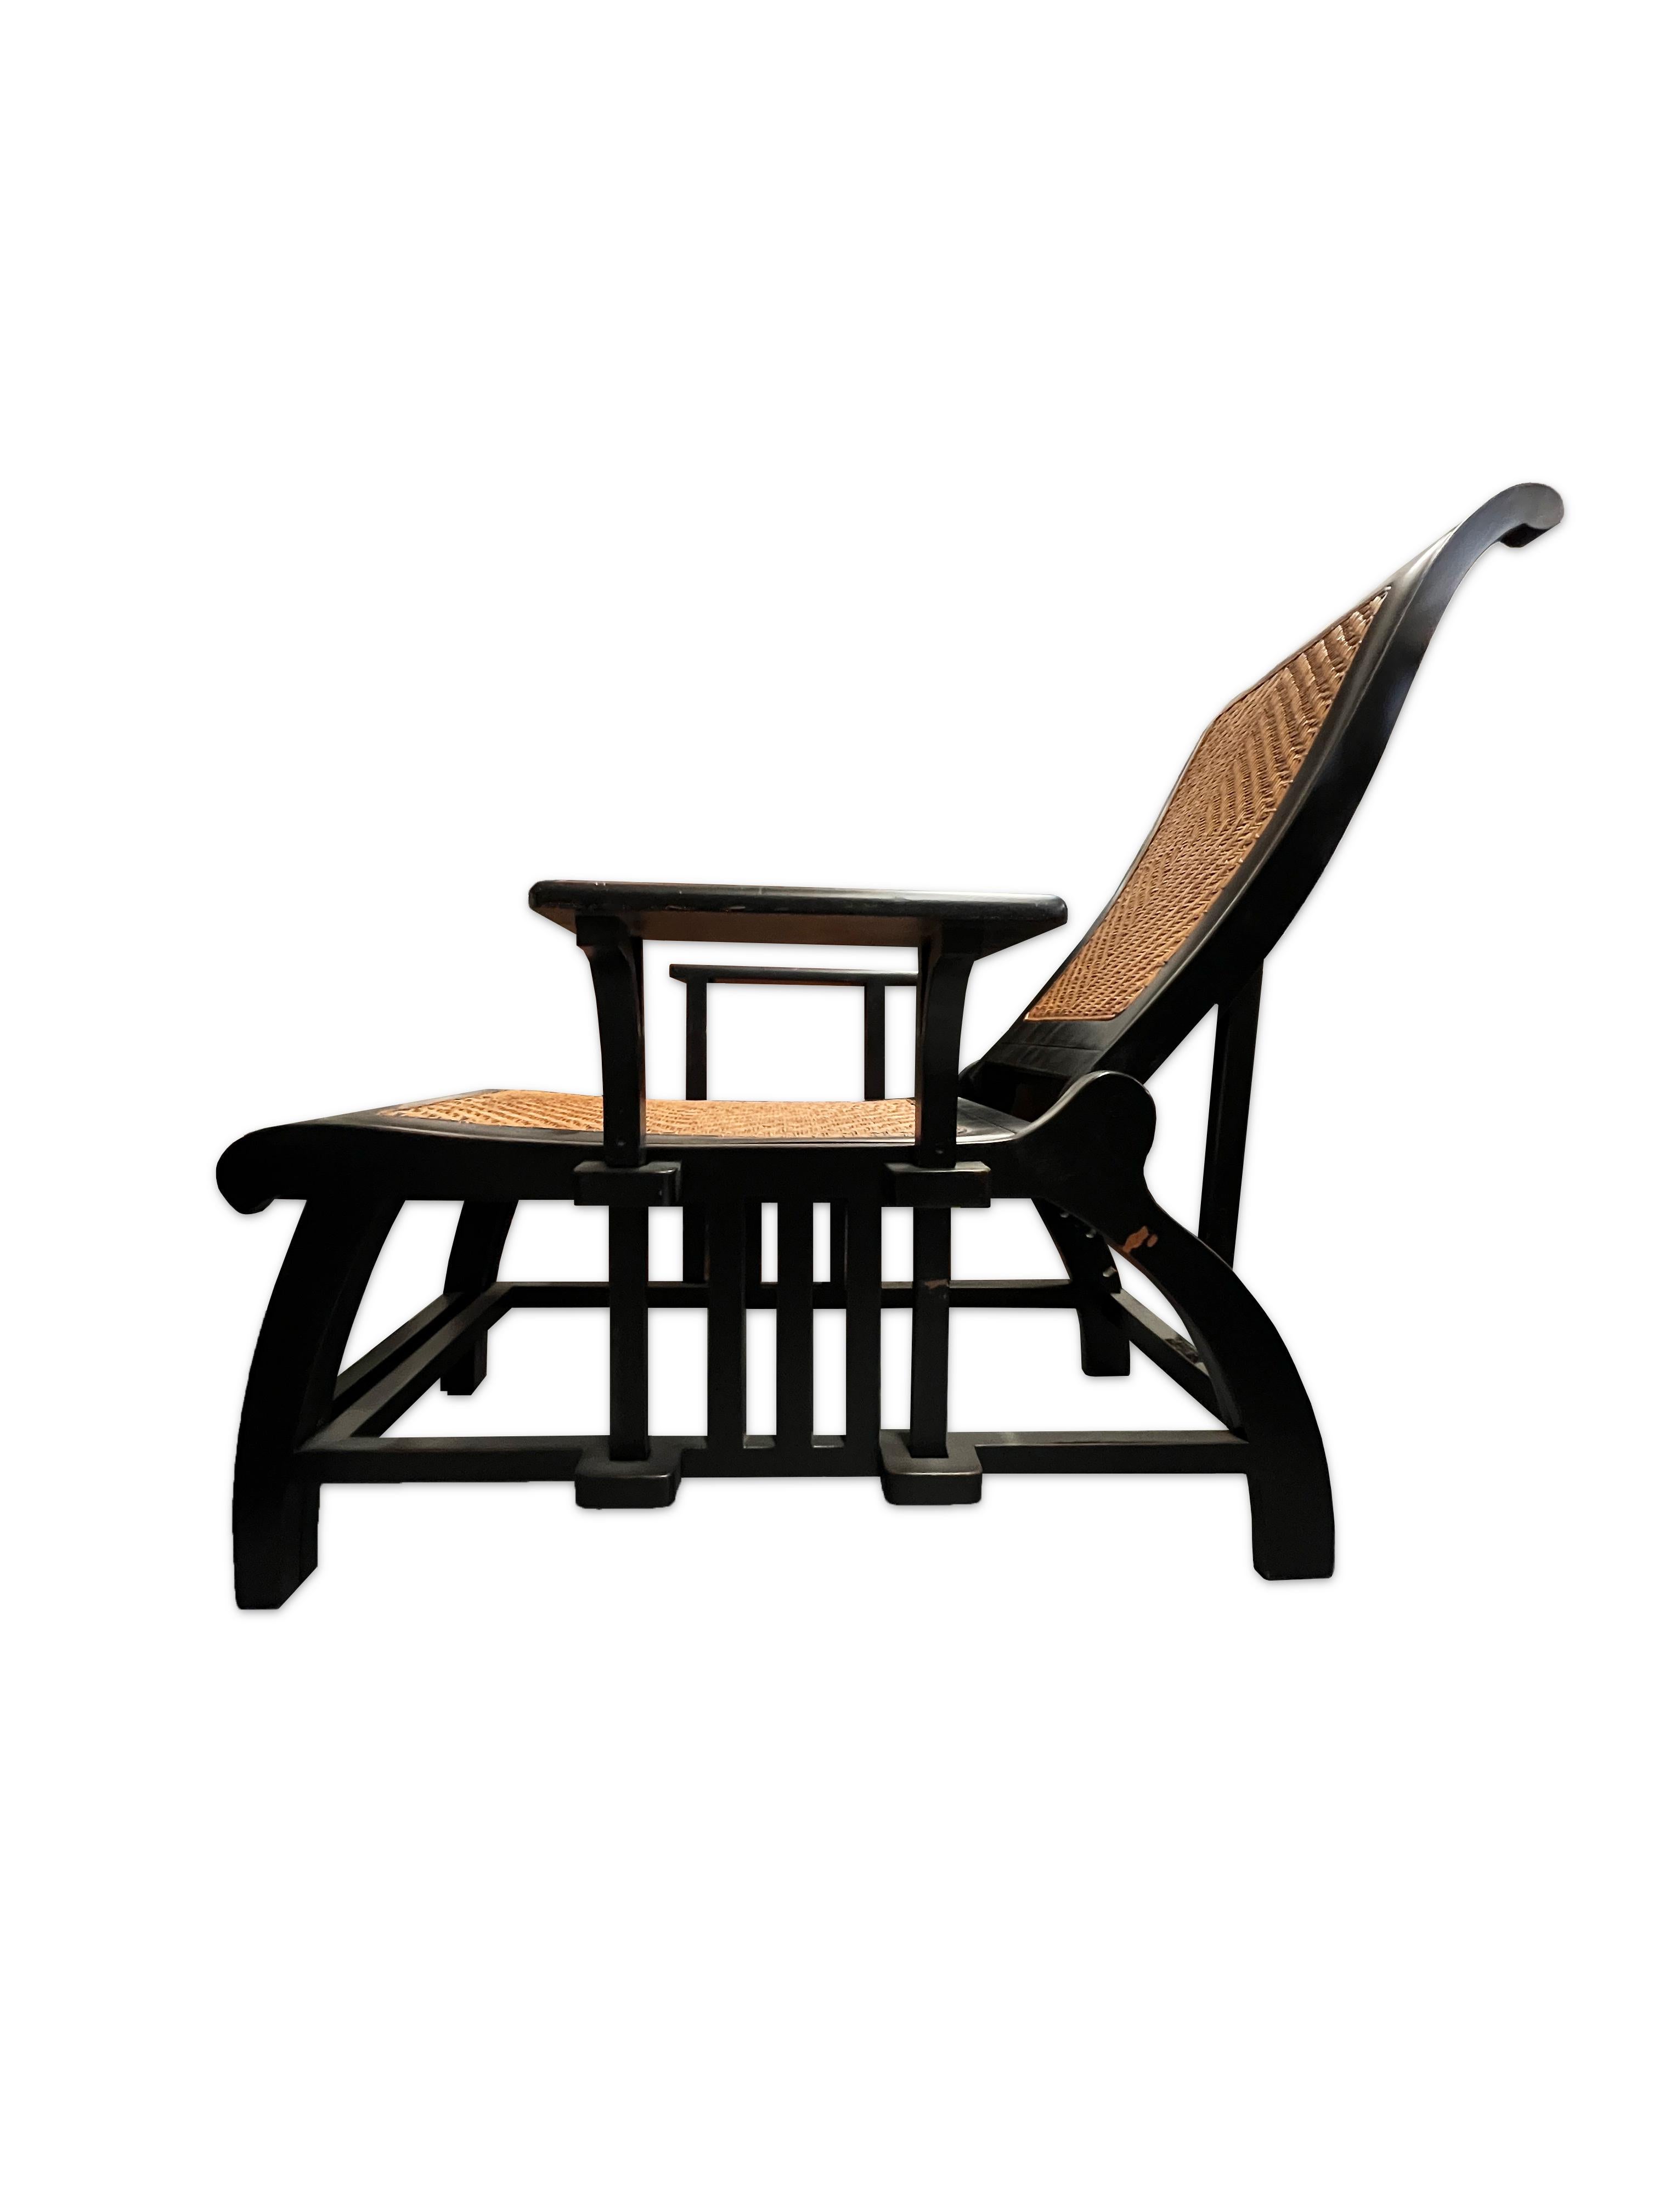 This pair of chaise lounge chairs make for excellent outdoor pieces. This comfortable chair opens to a full chaise lounge and has an adjustable backrest. The backrest and seat are made of woven rattan supported by a black lacquer wooden frame that